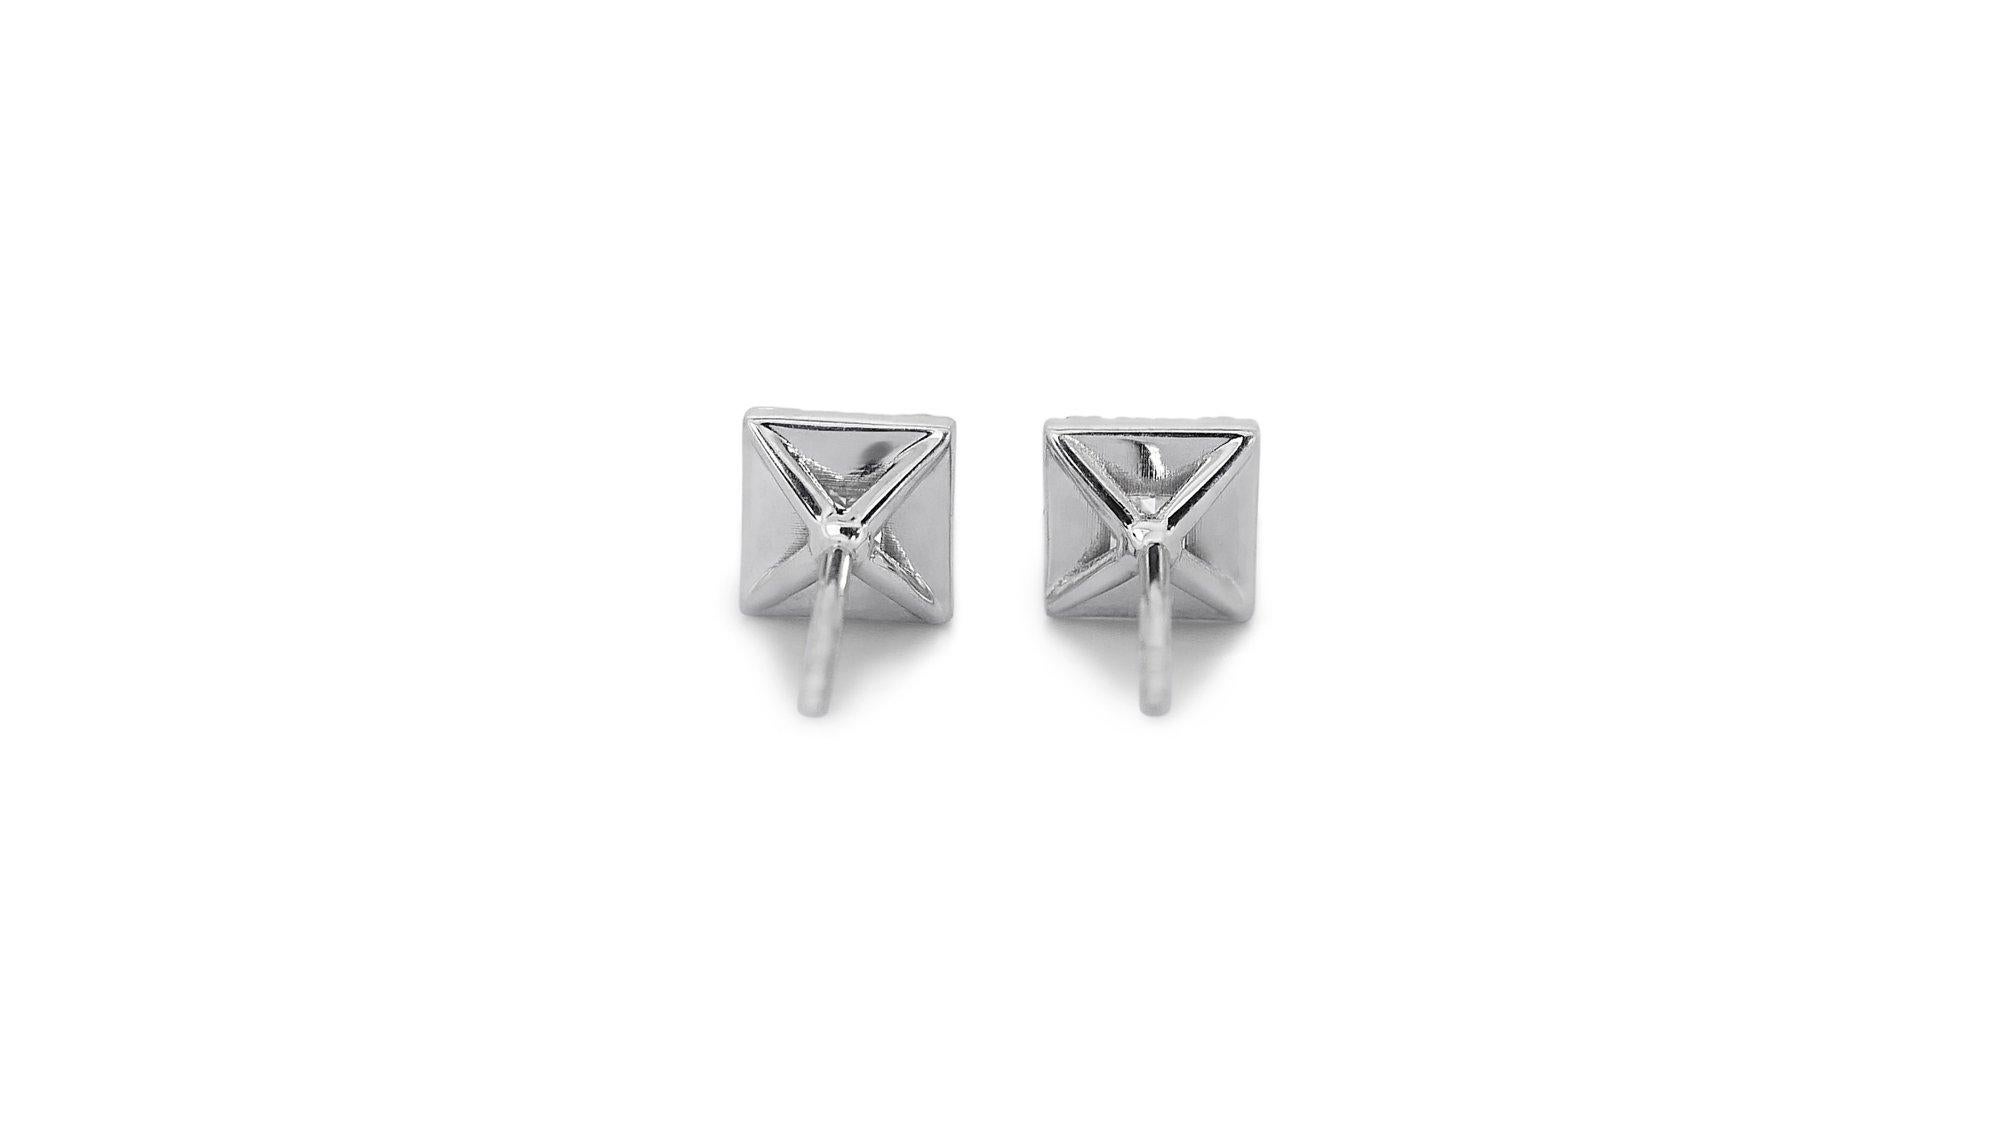 Stunning 2.37ct Diamond Stud Earrings in 18k White Gold - GIA Certified For Sale 1